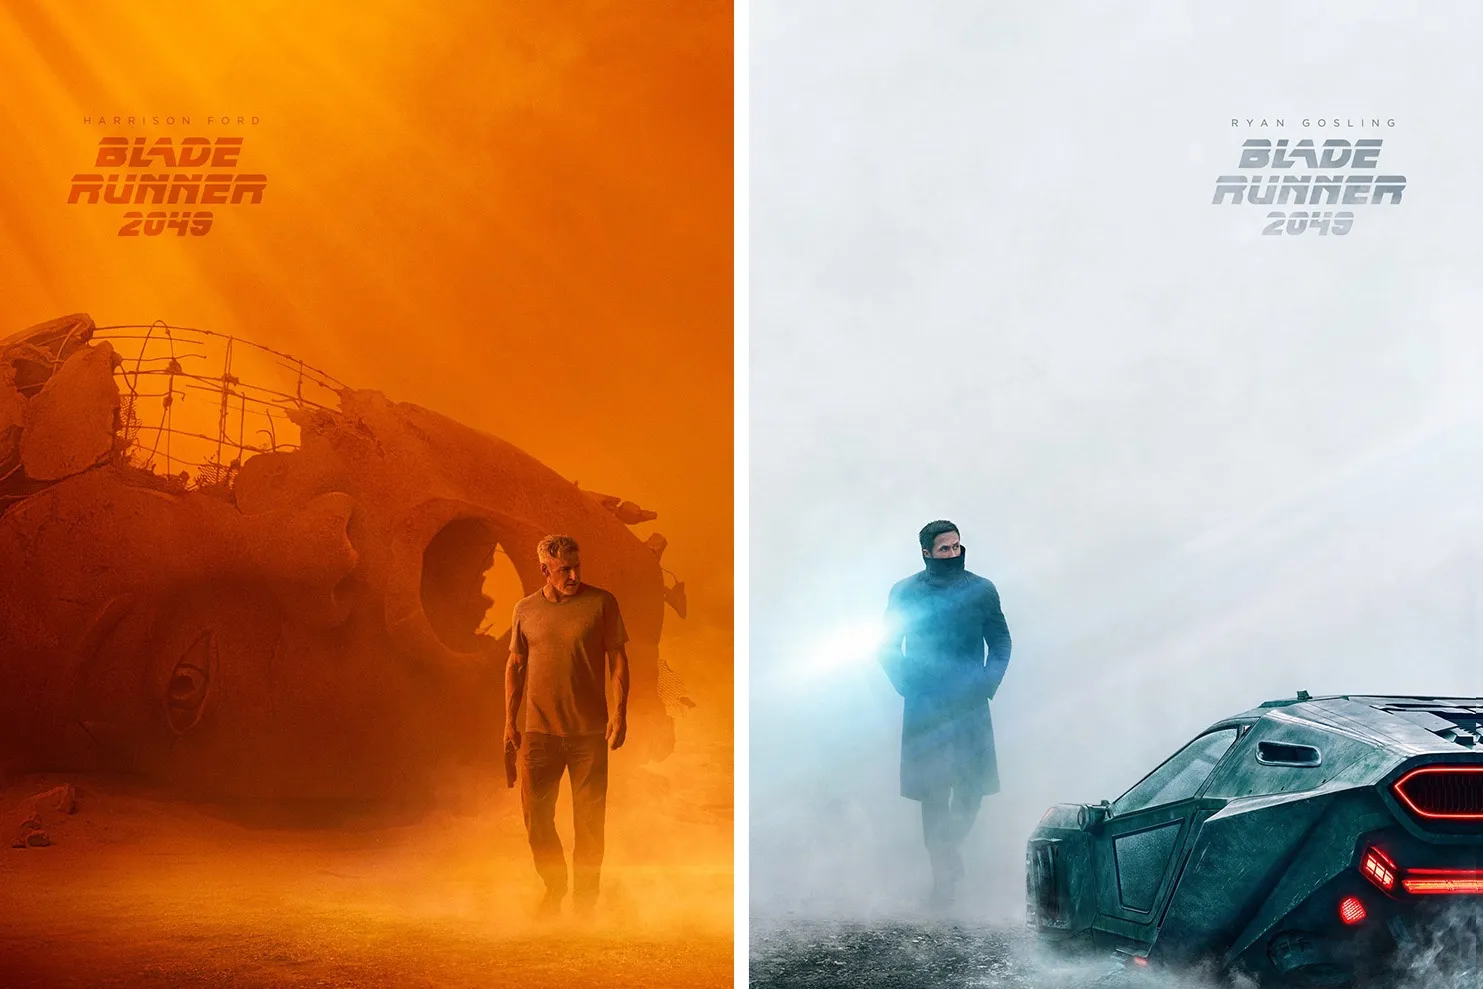 http 2f2fhypebeastcom2fimage2f20172f052fblade runner 2049 posters 01